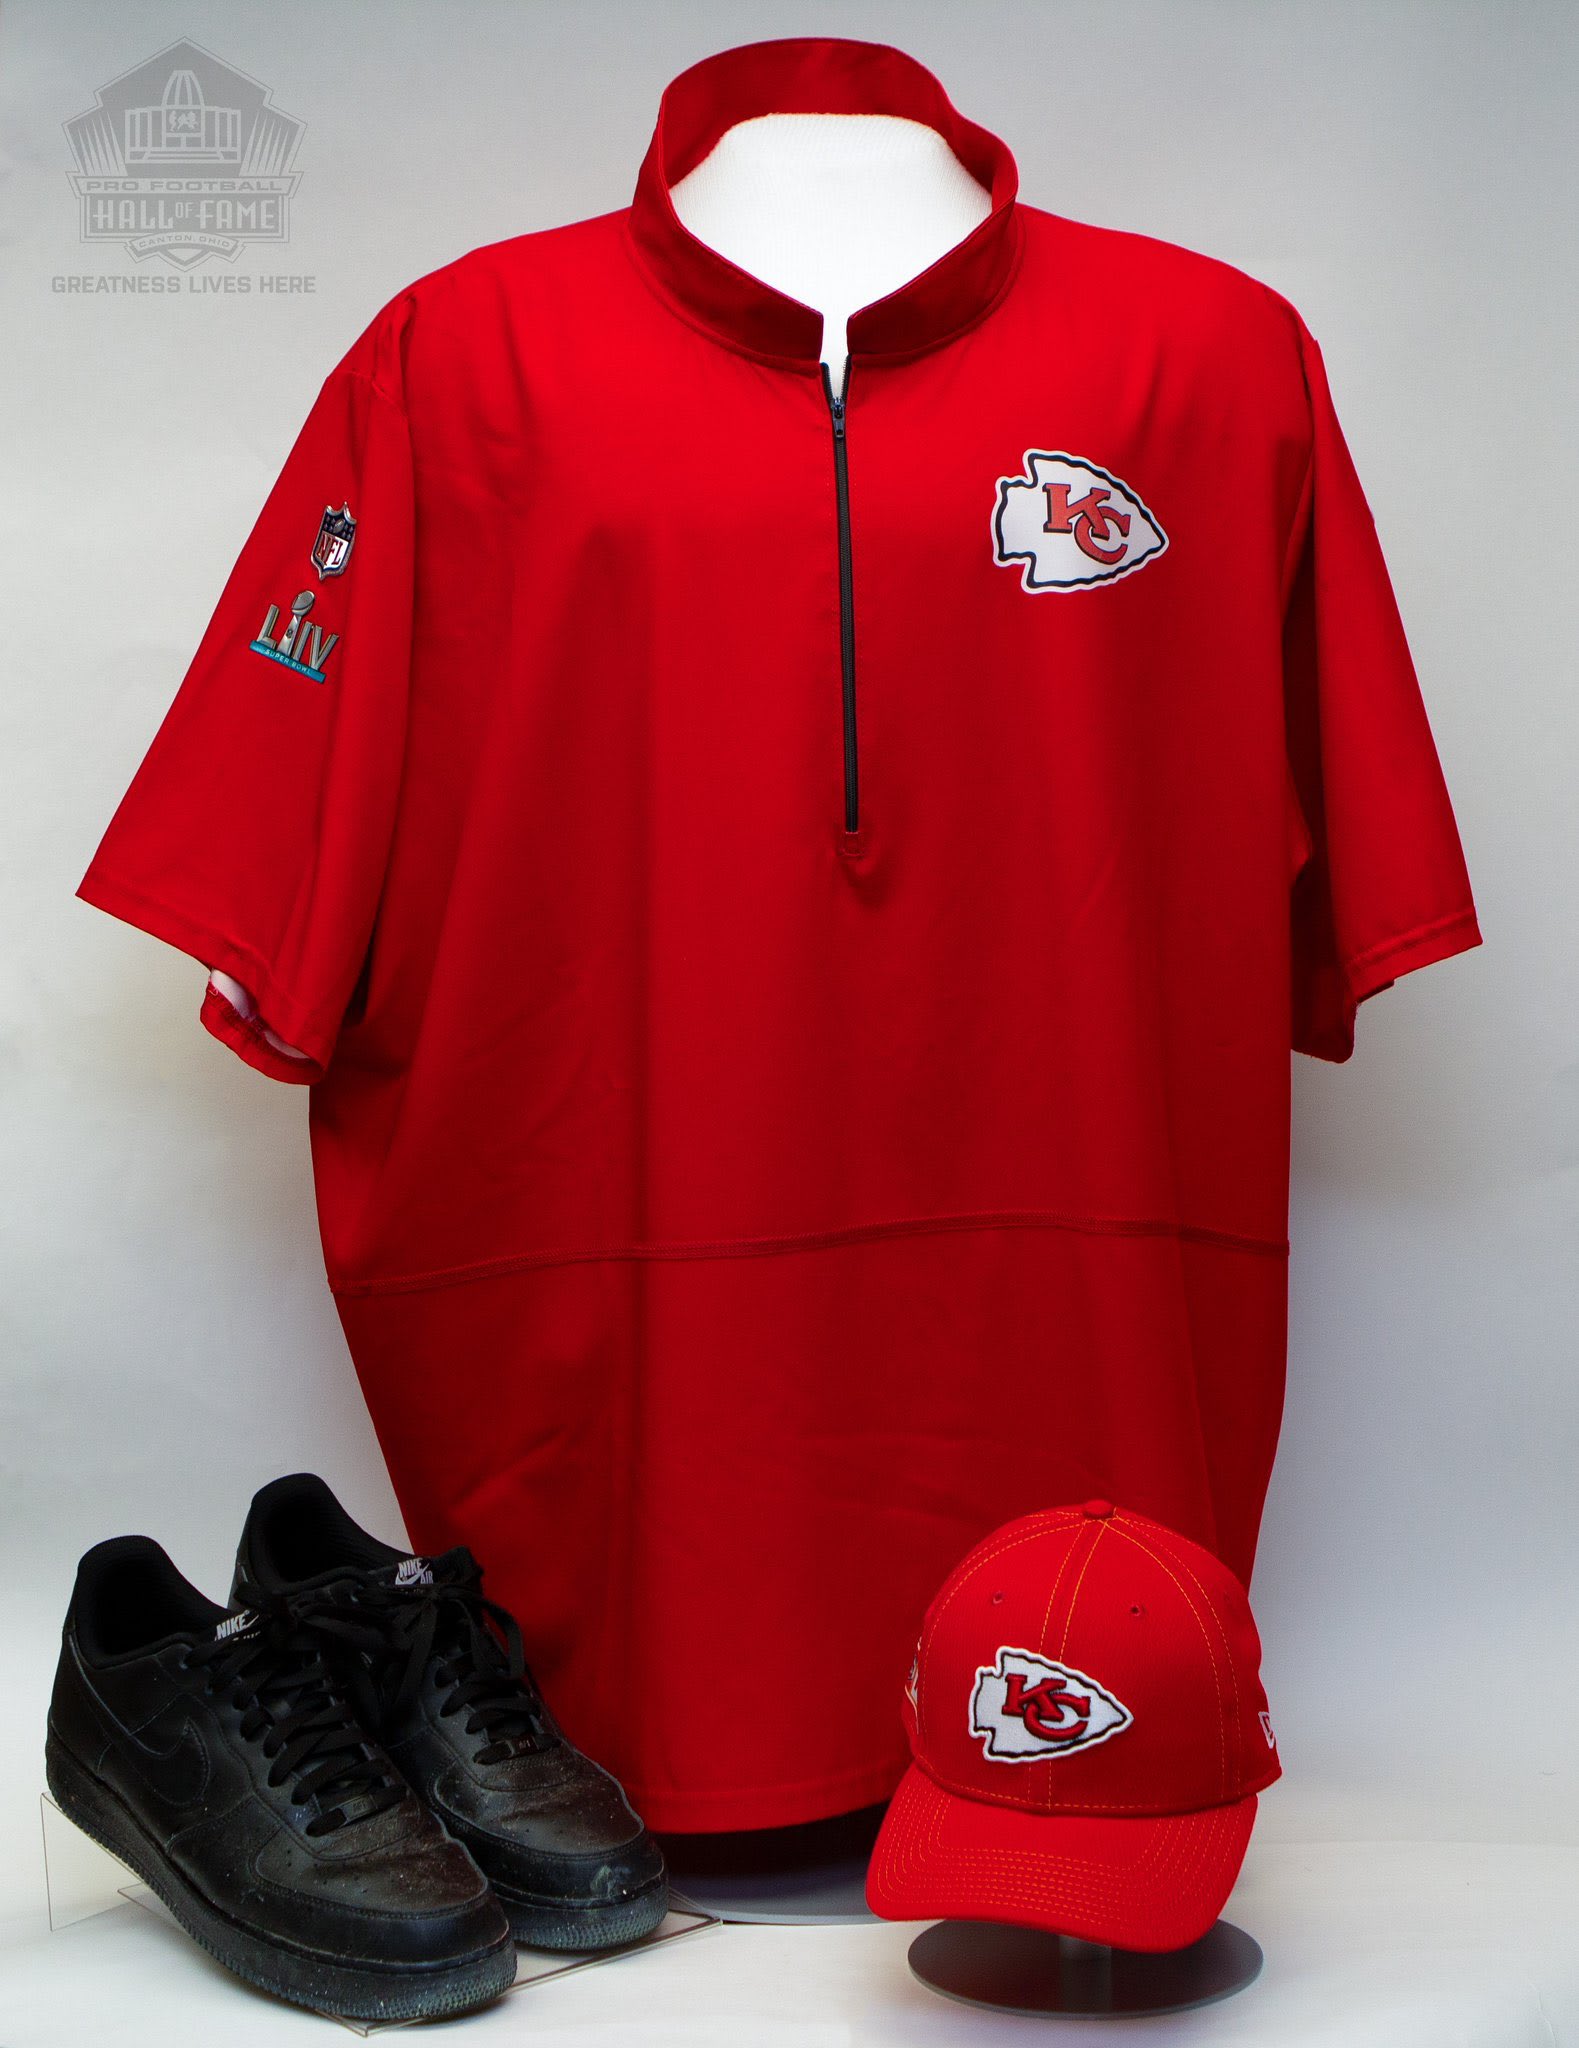 andy-reid-super-bowl-liv-outfit-pro-football-hall-of-fame